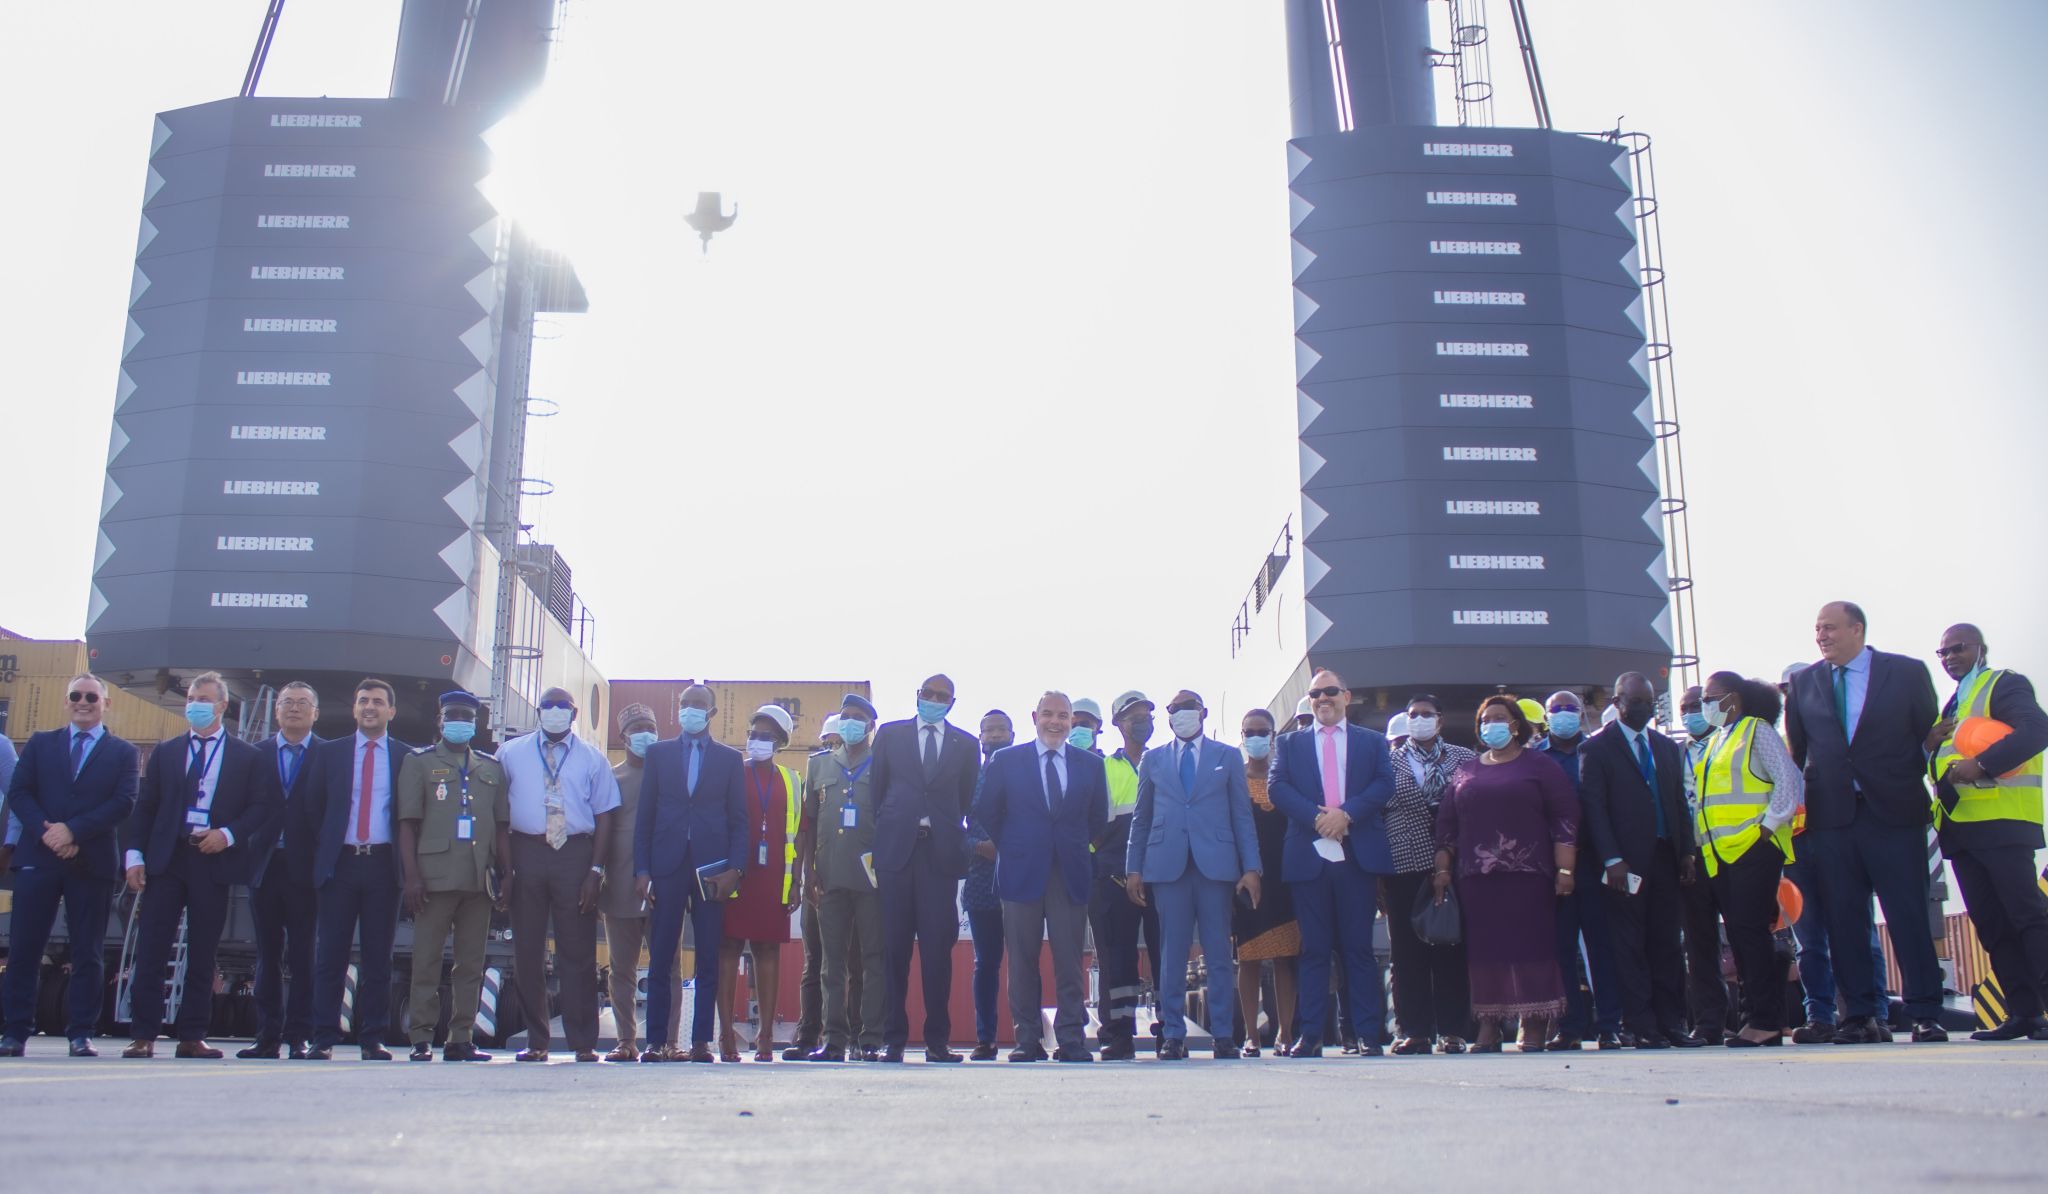 Reception of 02 mobile cranes by Minister Kokou Edem TENGUE for Lomé Container Terminal (LCT)